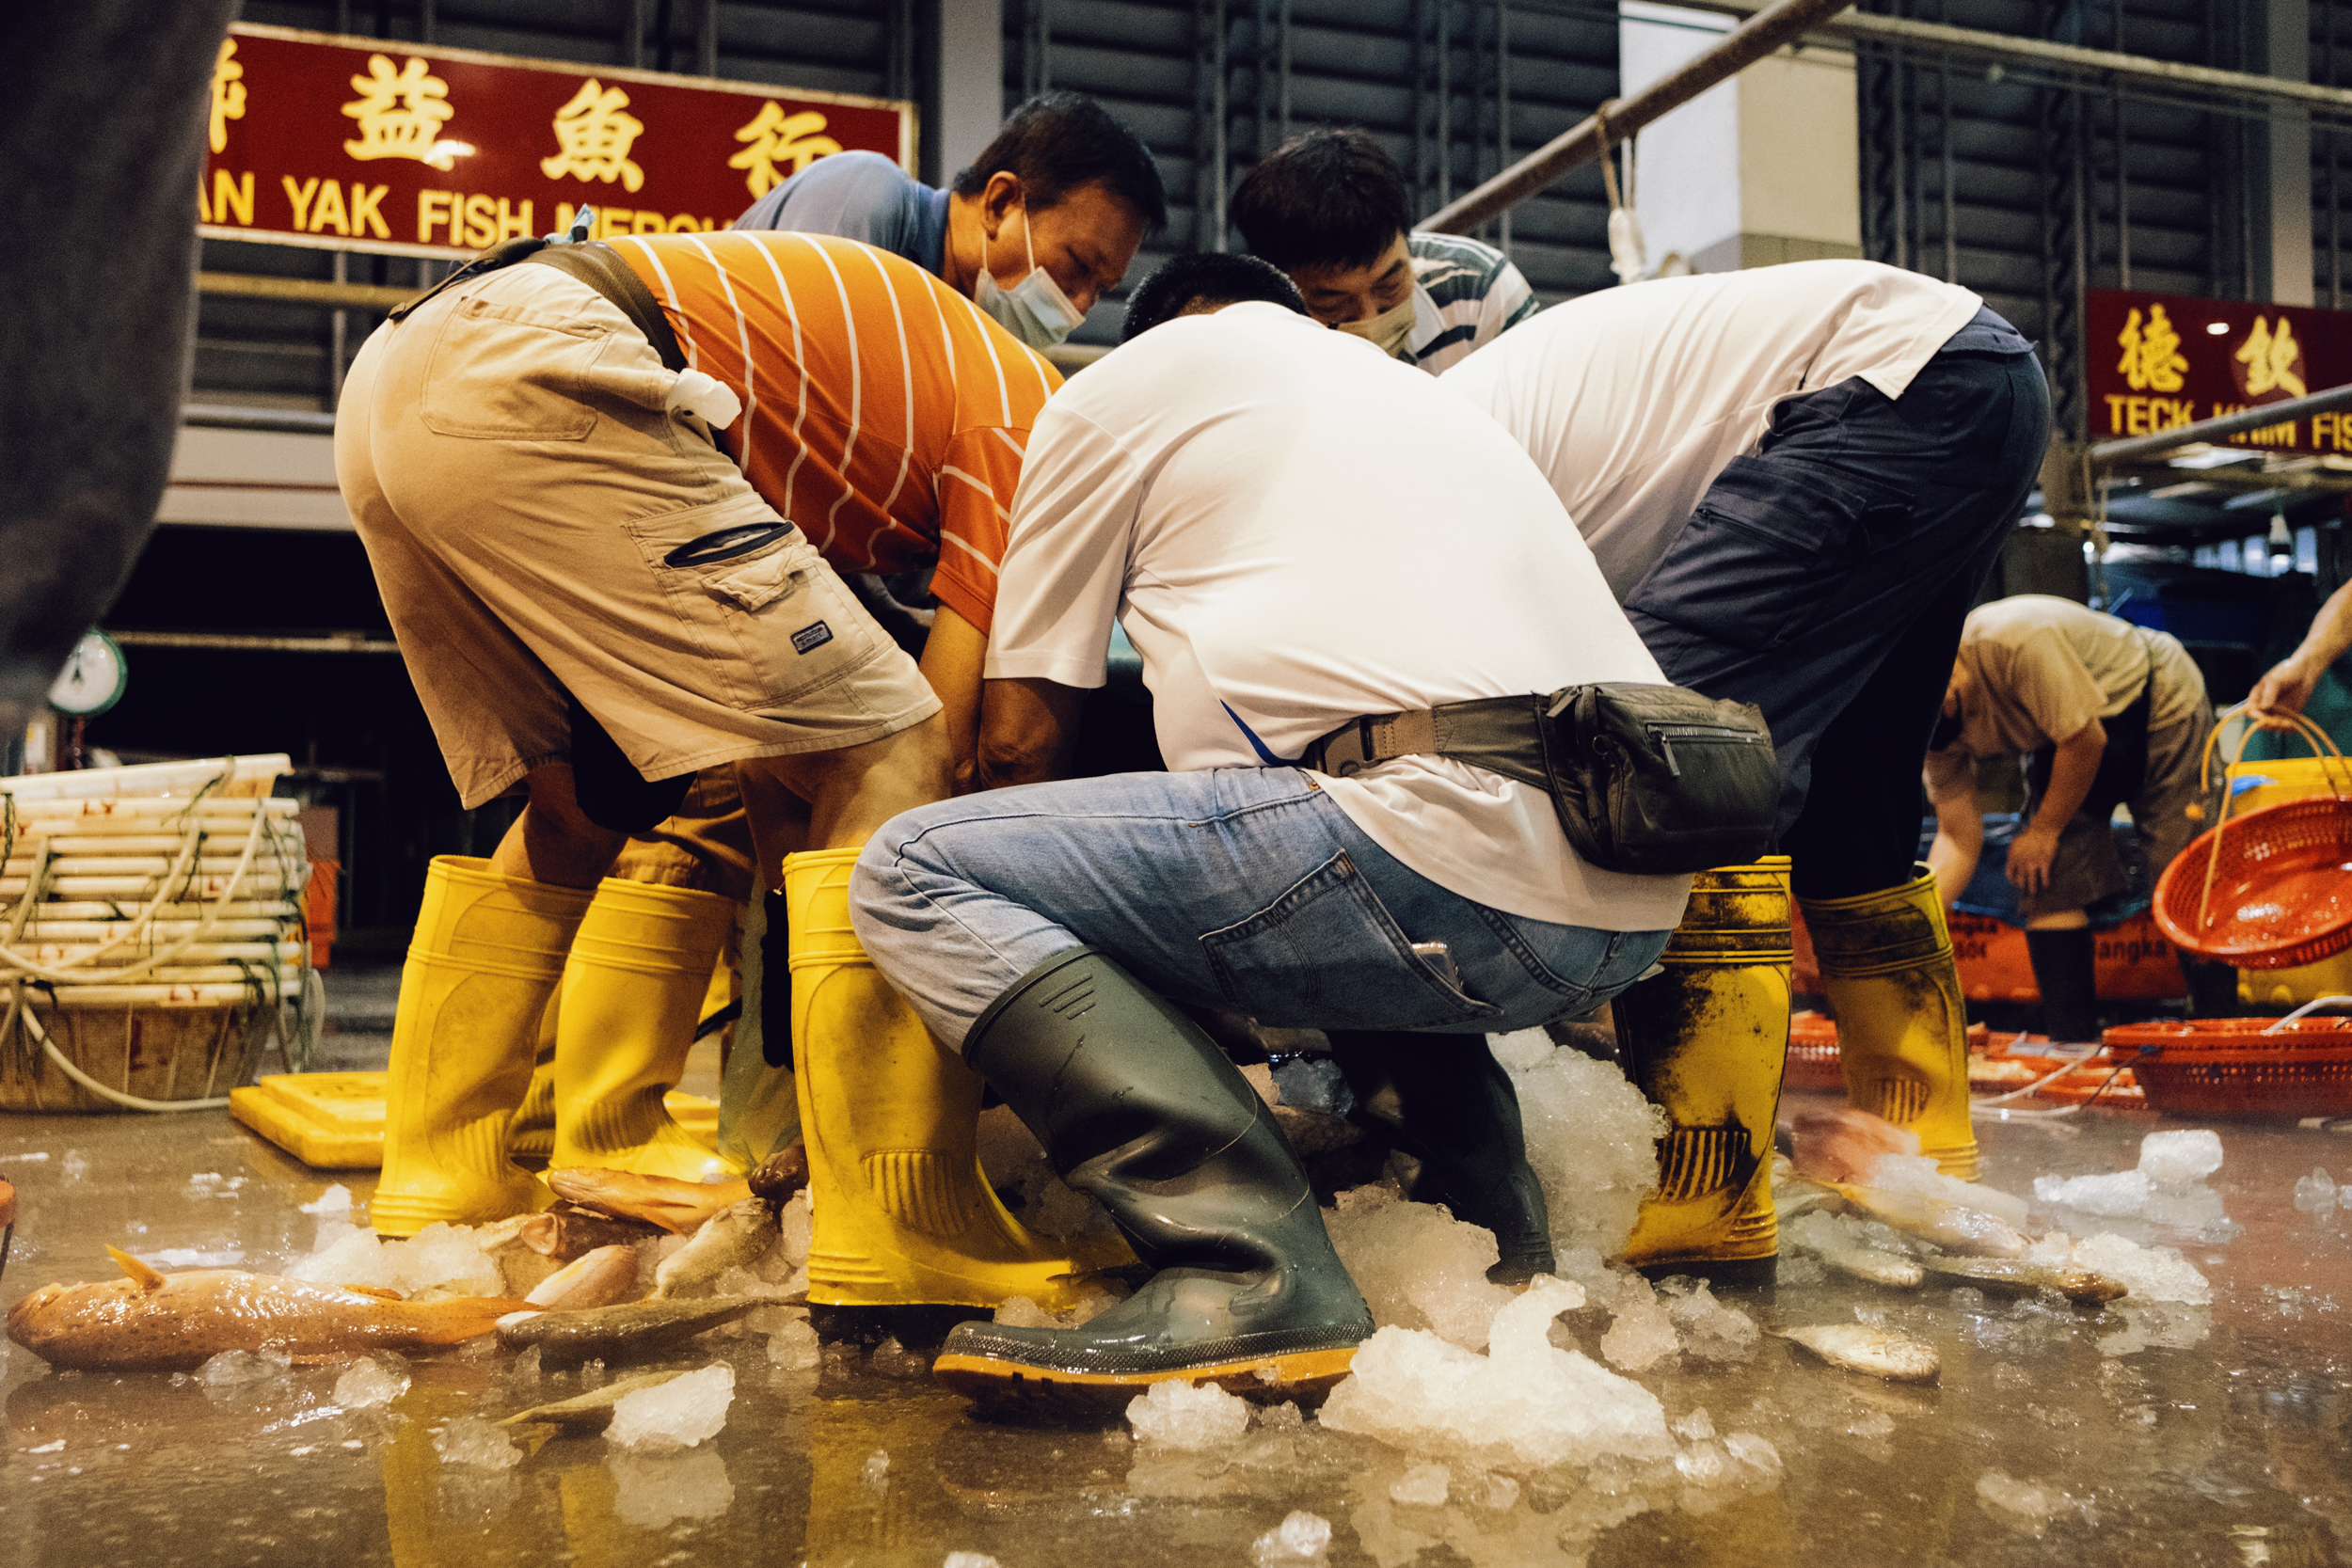 Customers and workers help to empty the tubs contents onto the ground.